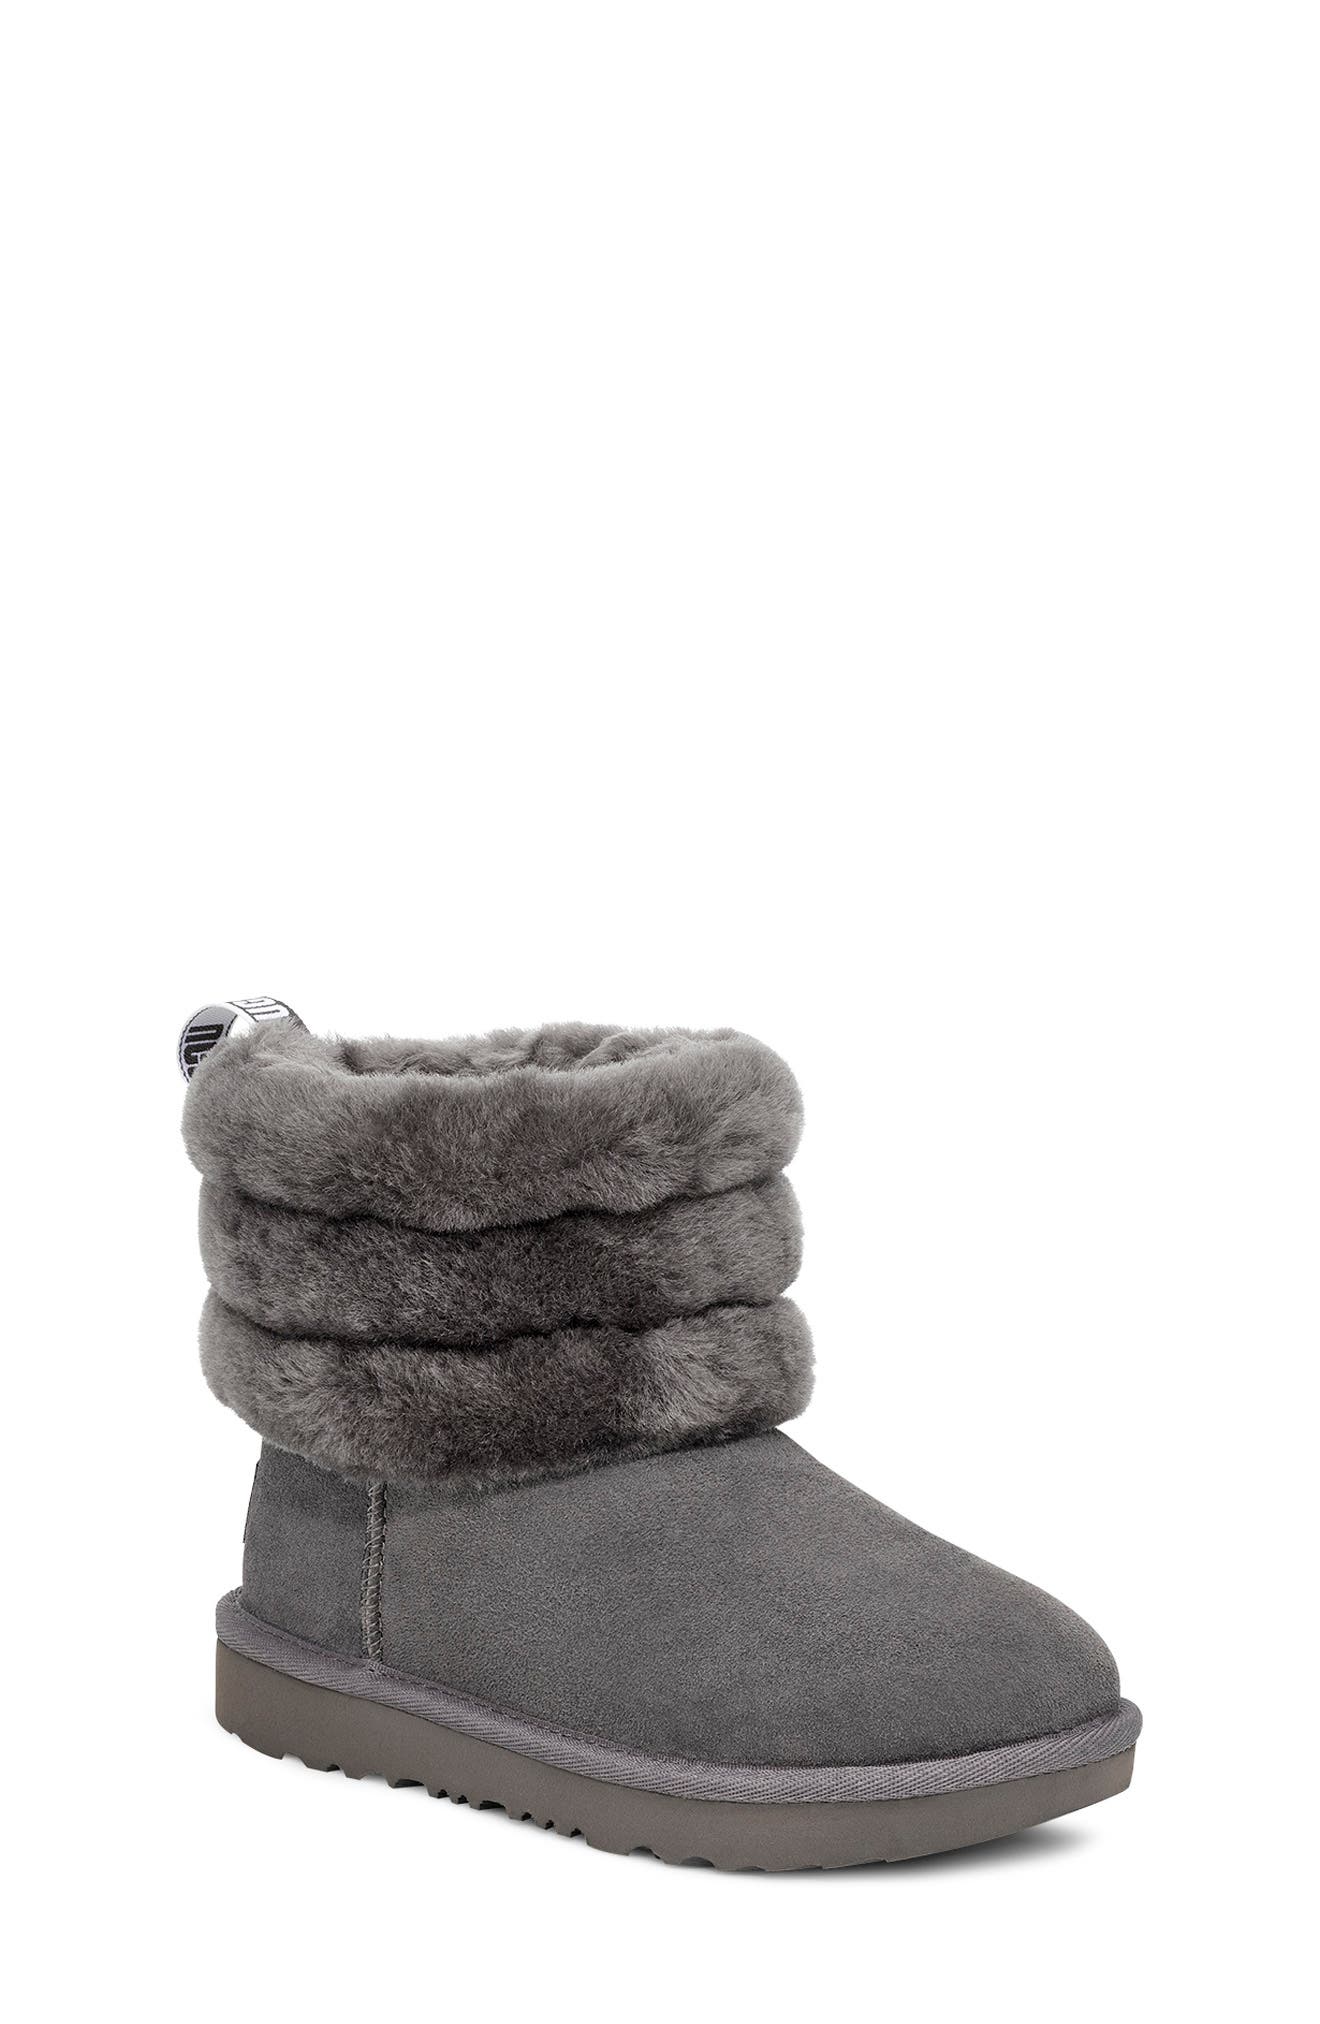 ugg fluff quilted boot